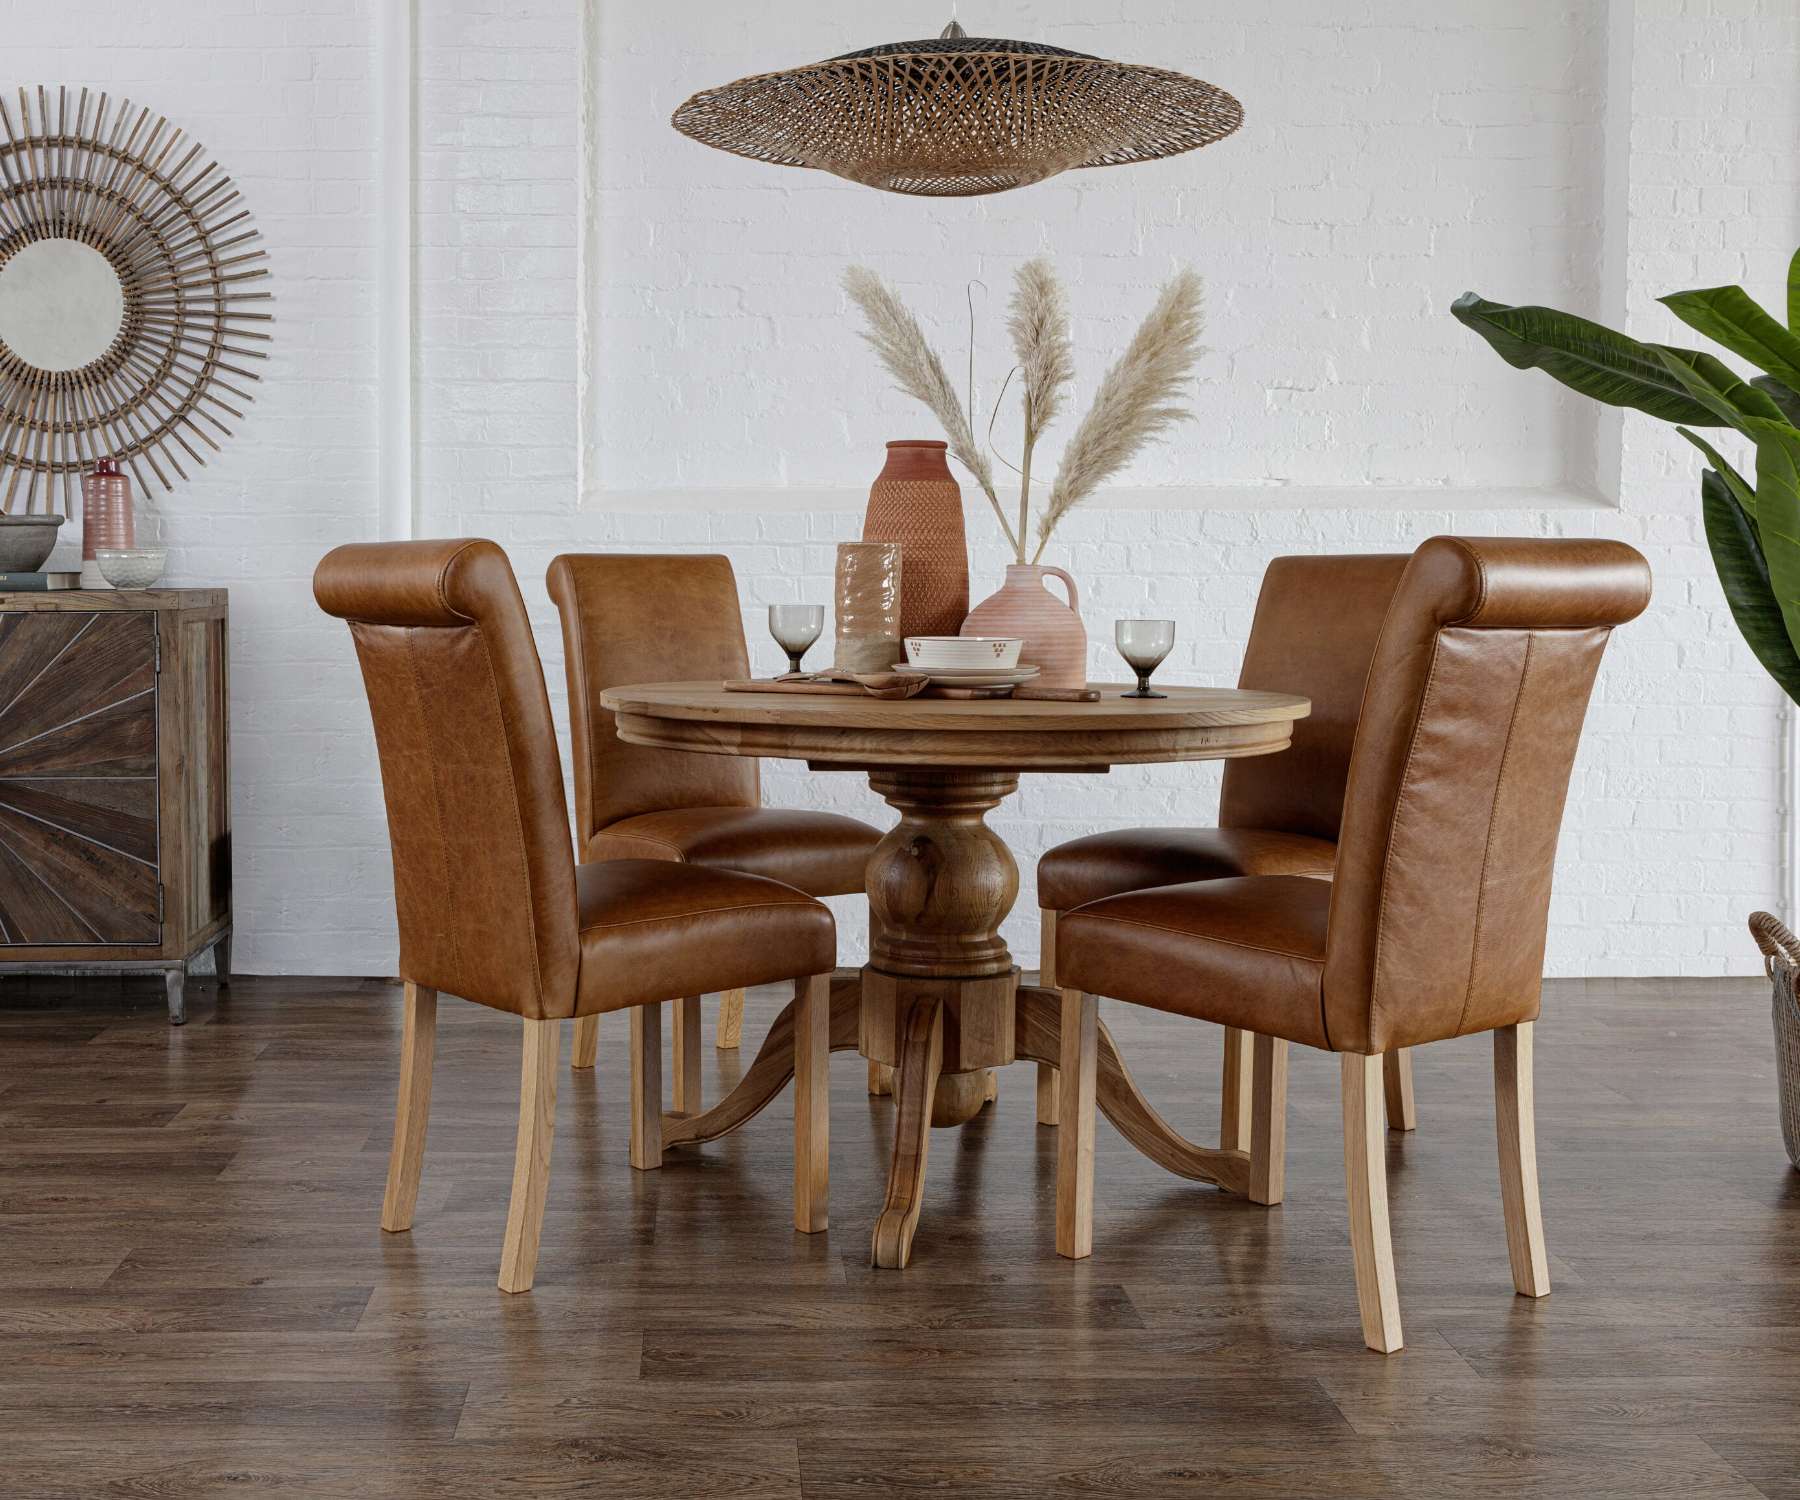 oak round dining table with brown faux leather chairs